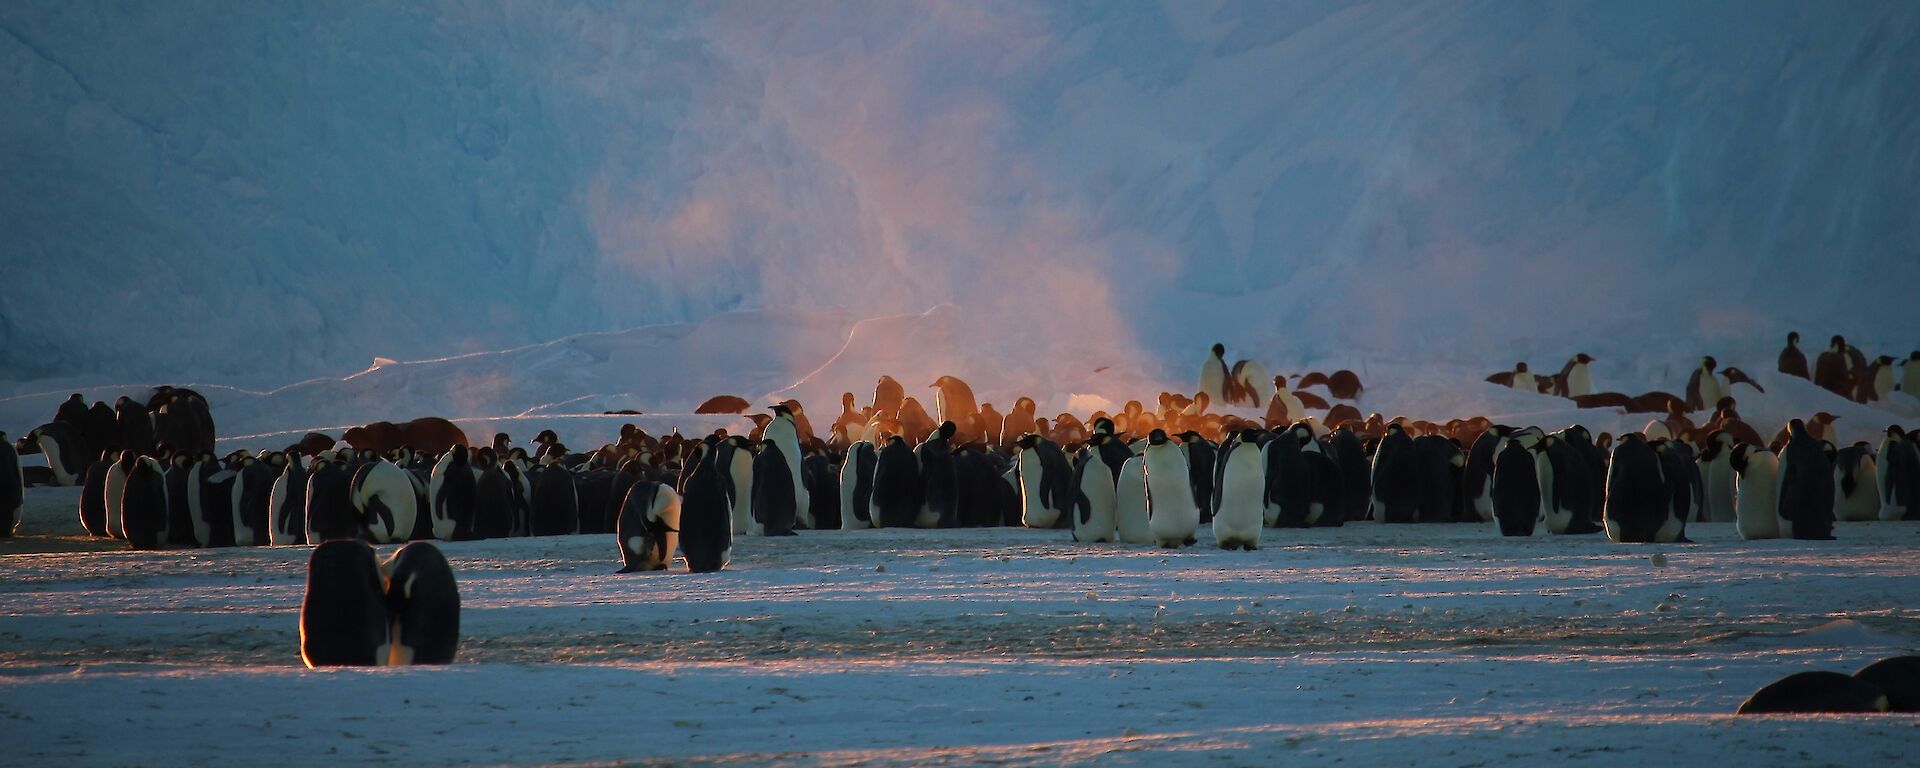 Steam rises from emperor penguin huddle on ice at Auster Rookery in winter